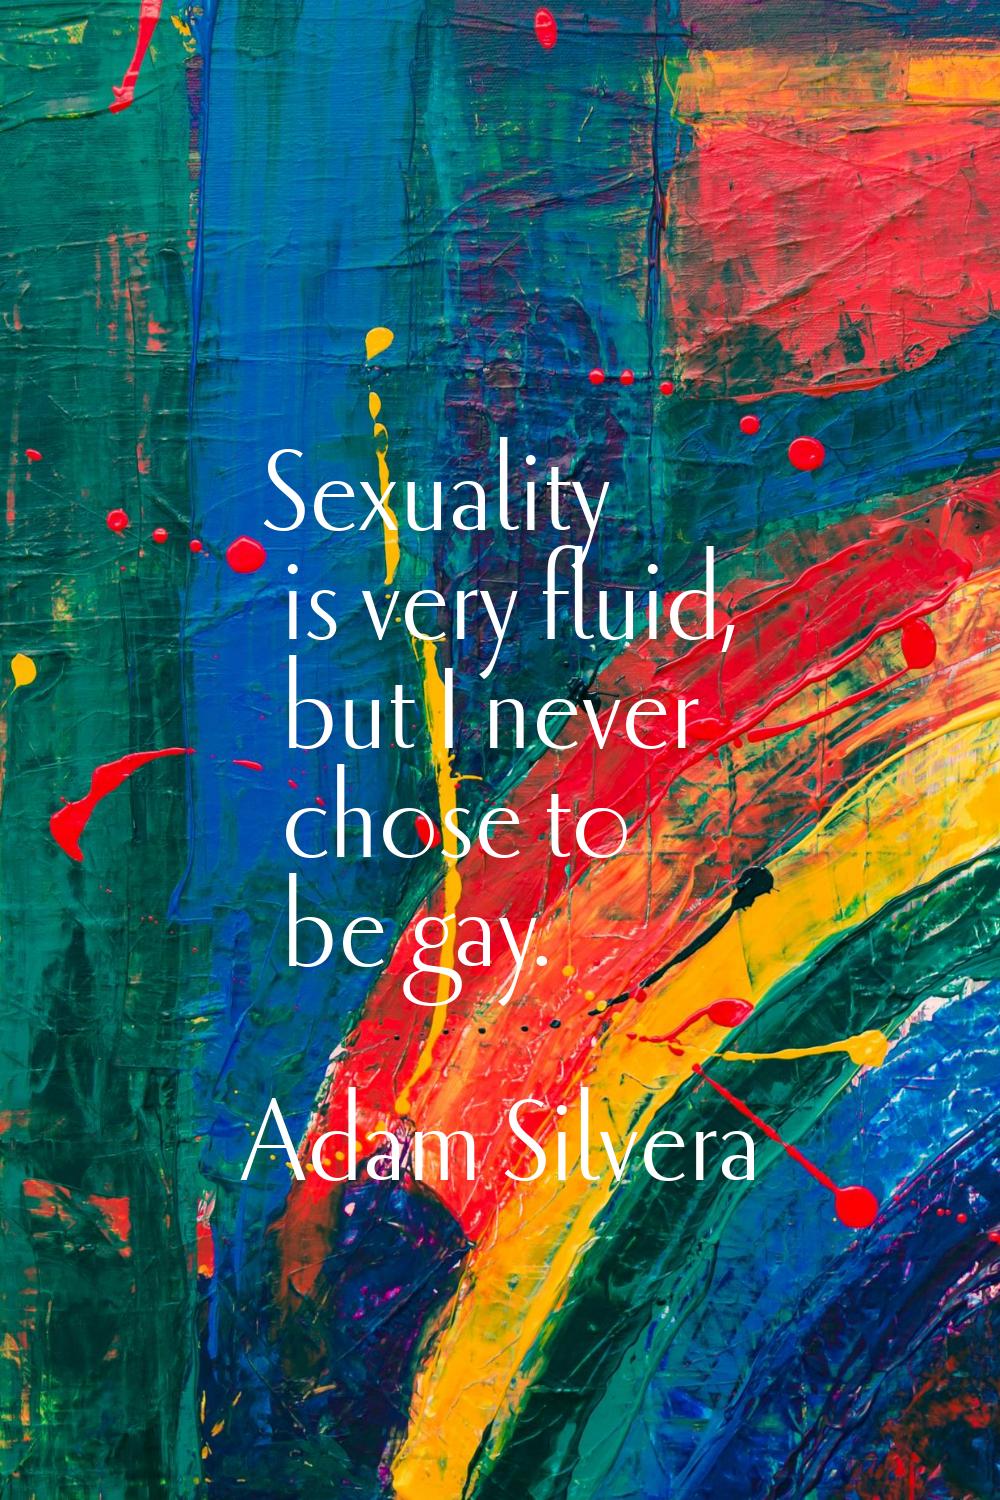 Sexuality is very fluid, but I never chose to be gay.